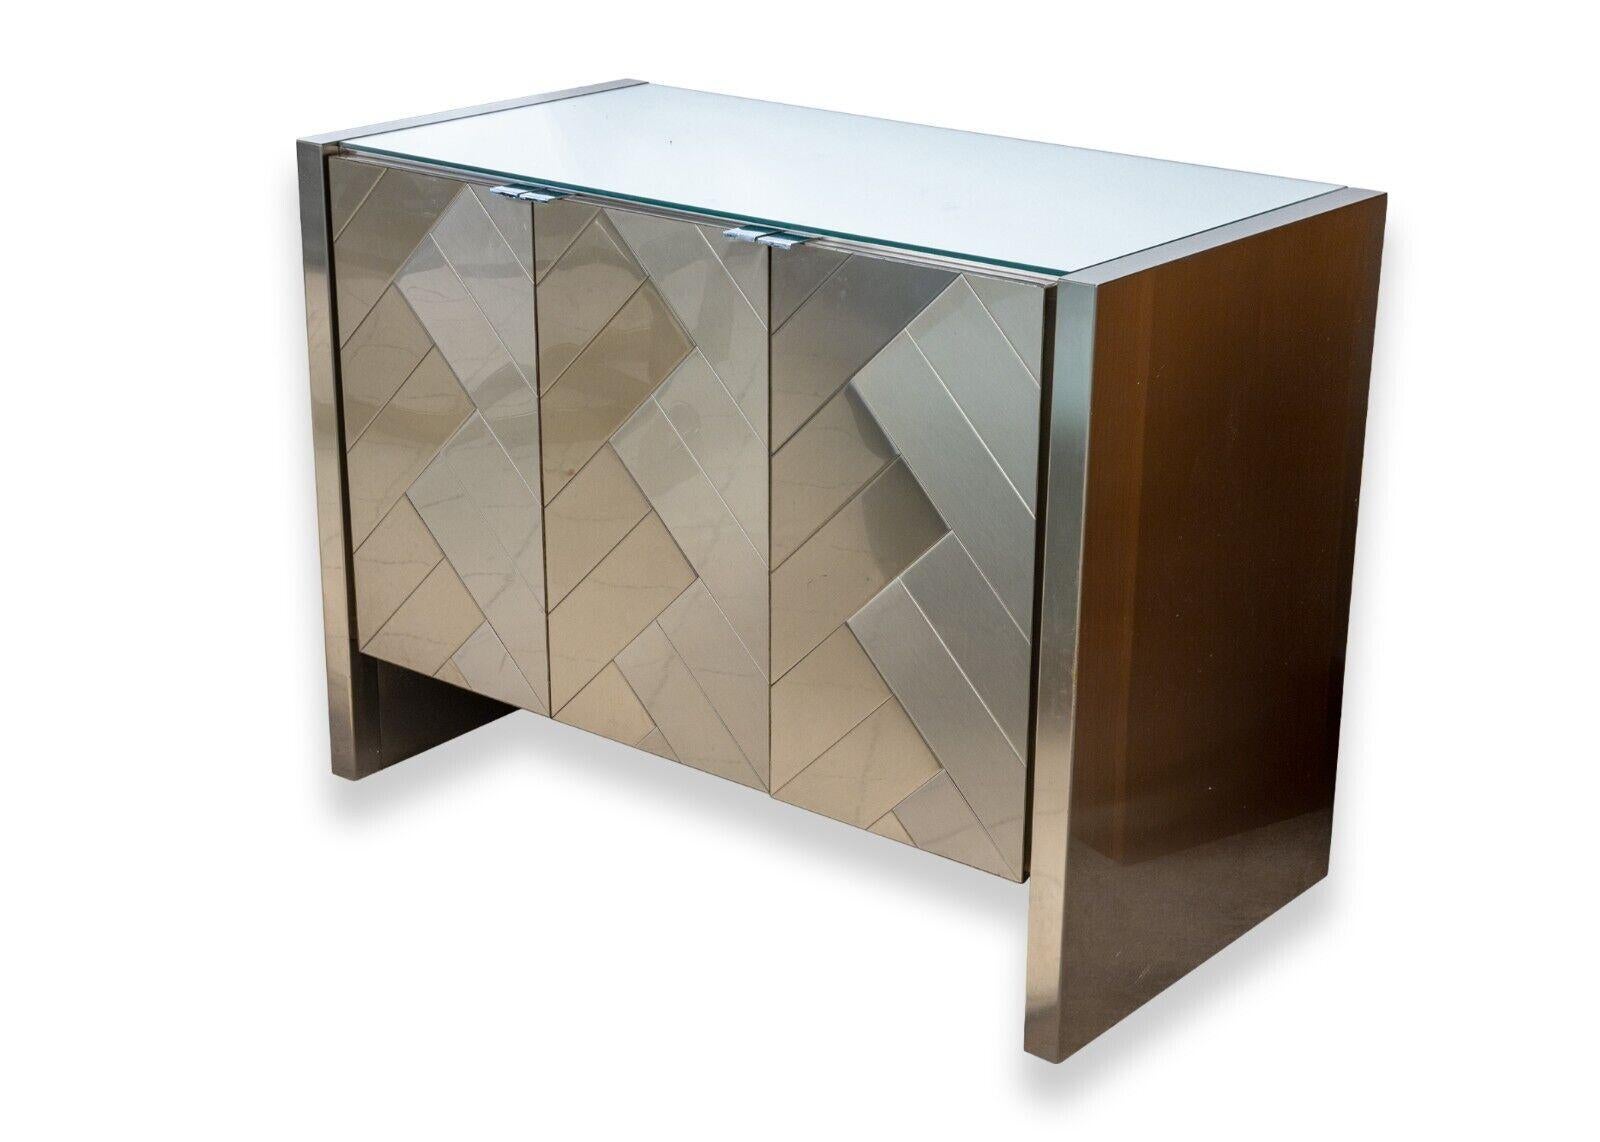 An Ello contemporary modern small chevron credenza. These beautiful contemporary credenzas feature a beautiful choice of materials, gorgeous design, and plenty of functional storage space. Each of these identical pieces feature a glass top, brushed